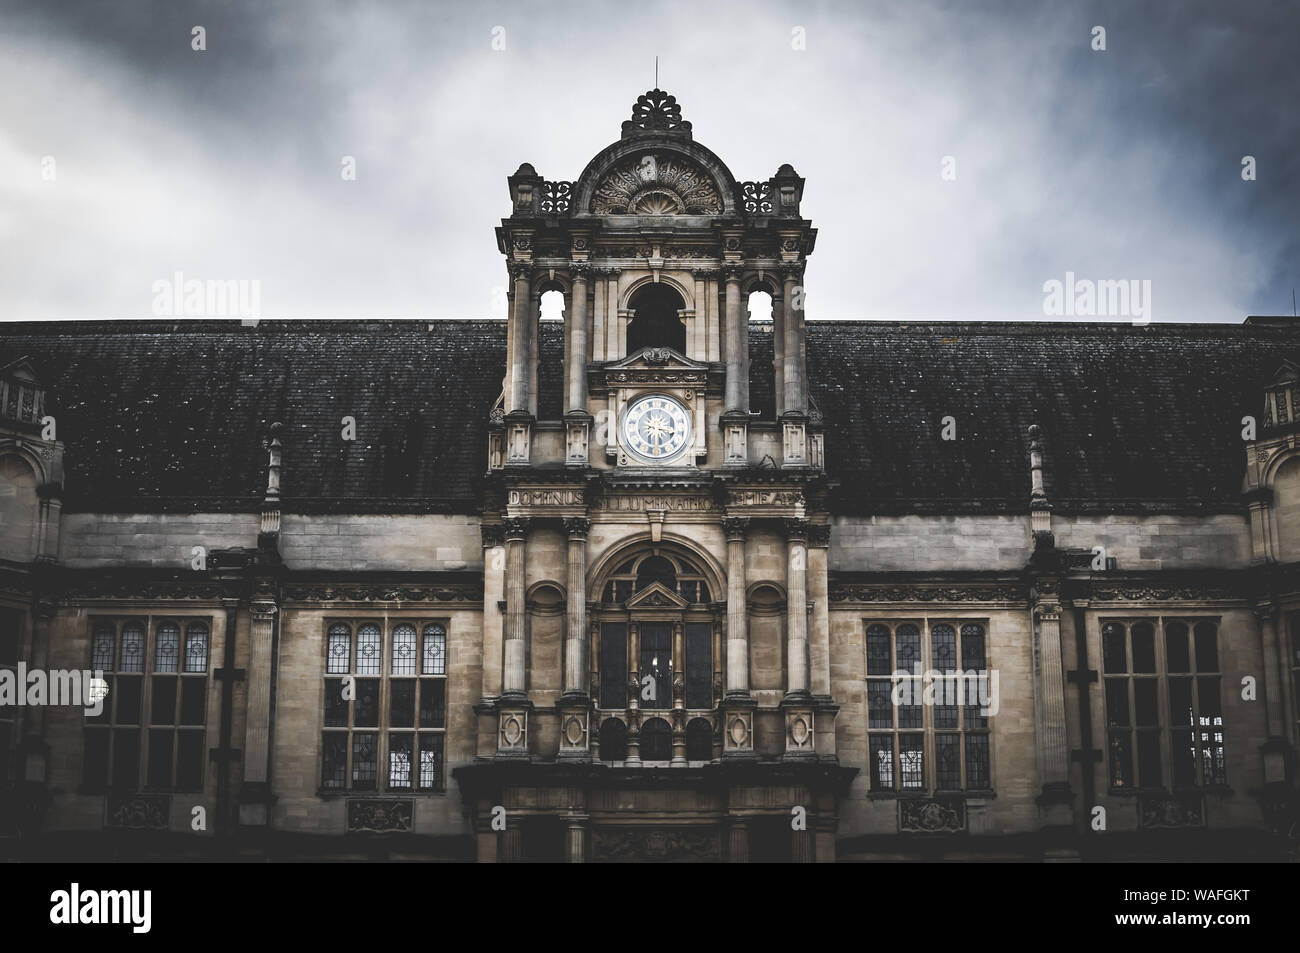 The Oxford University Examination School, Merton st, Oxford. It was designed by Sir Thomas Jackson in 1876 and built in 1882. Stock Photo